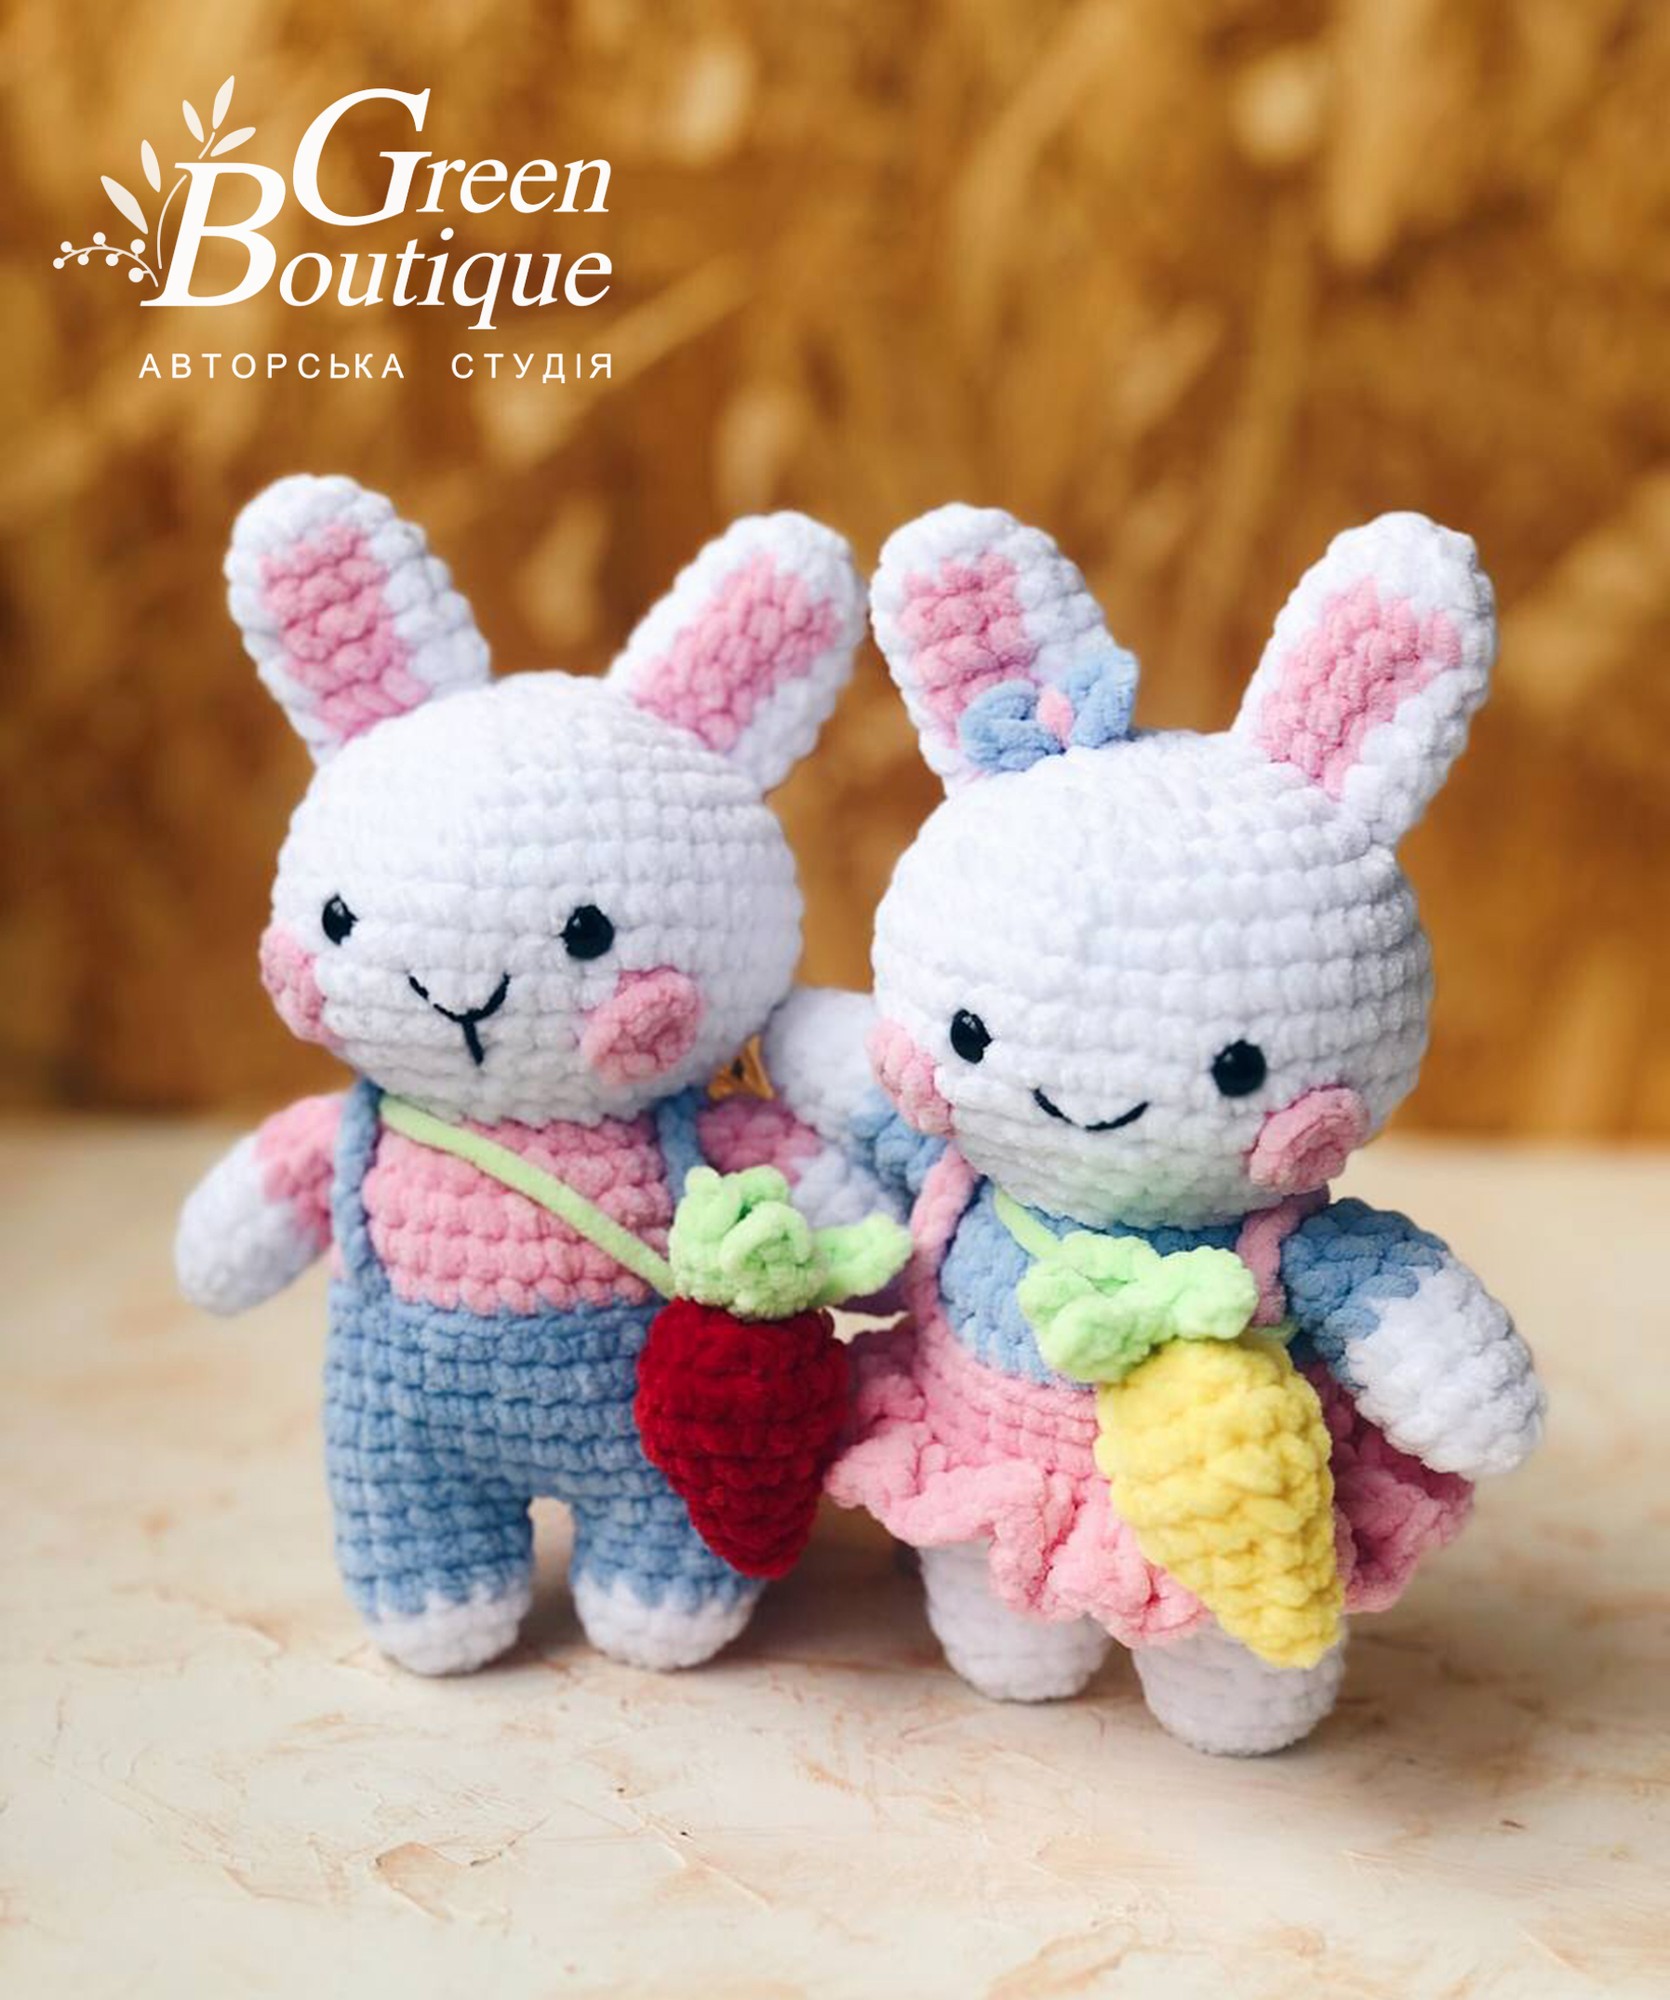 Plush toy Boy and Girl Bunny